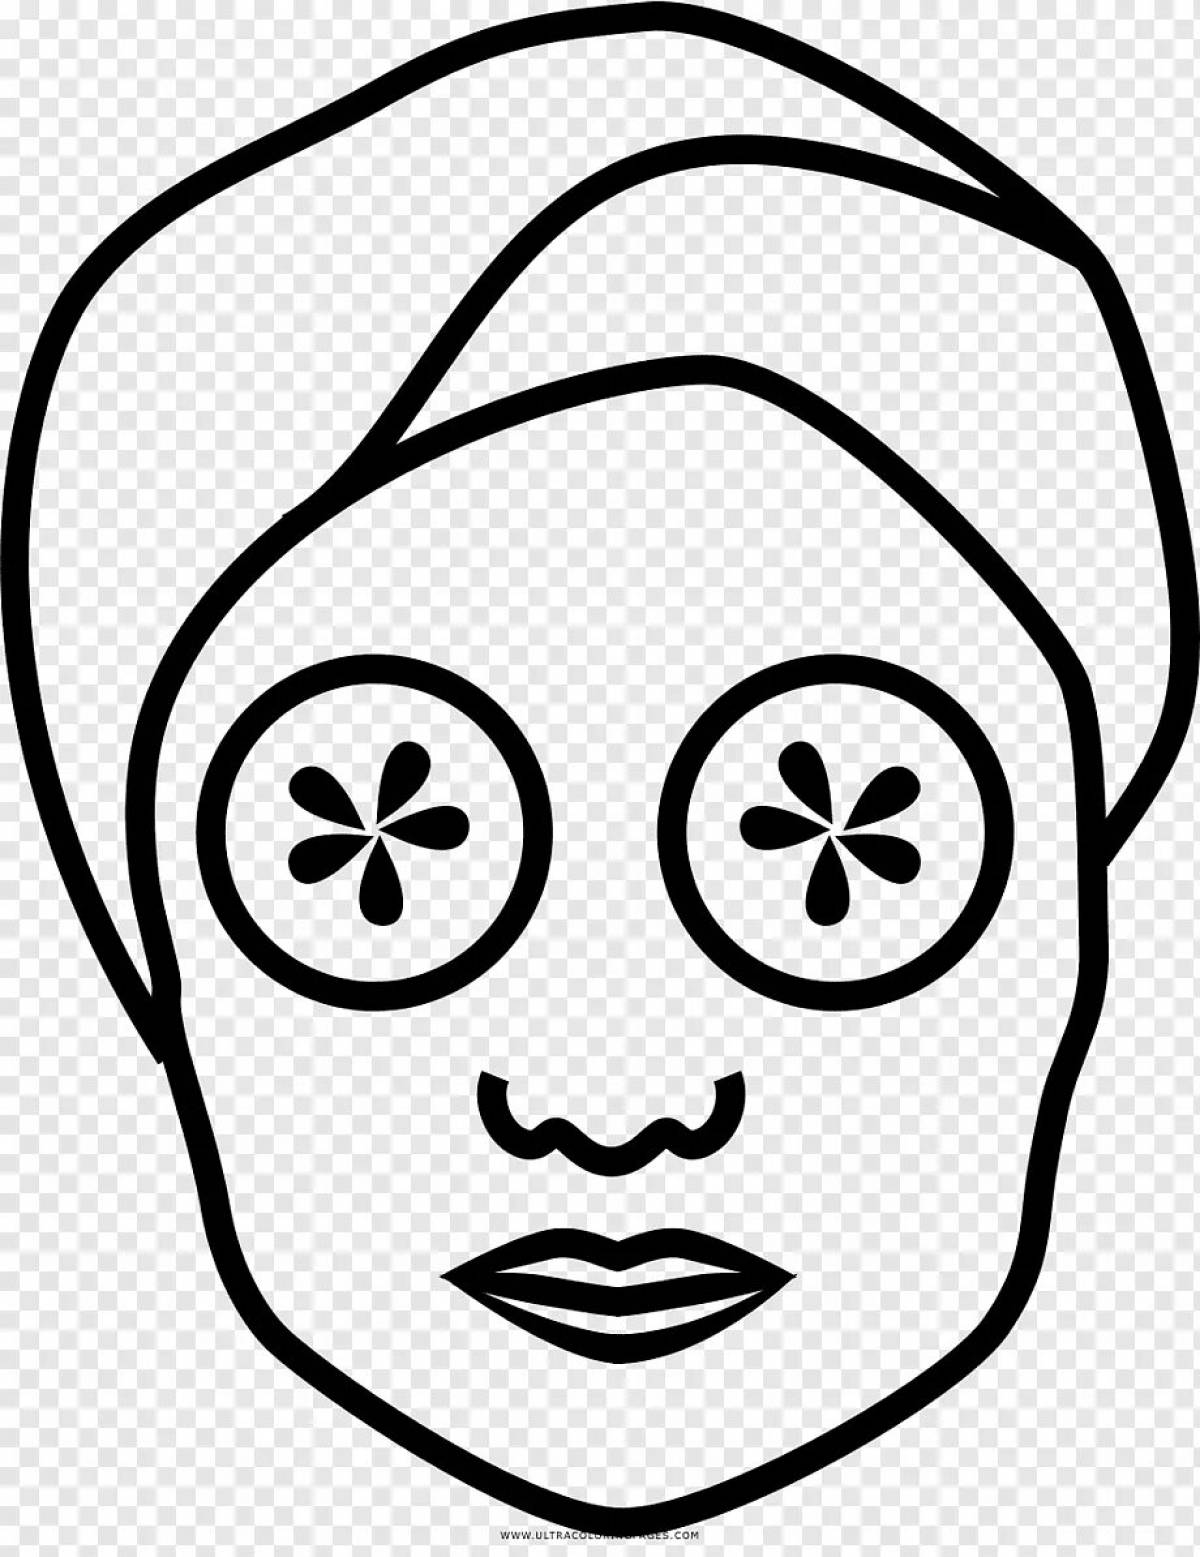 Coloring page cosmetics stylish face mask